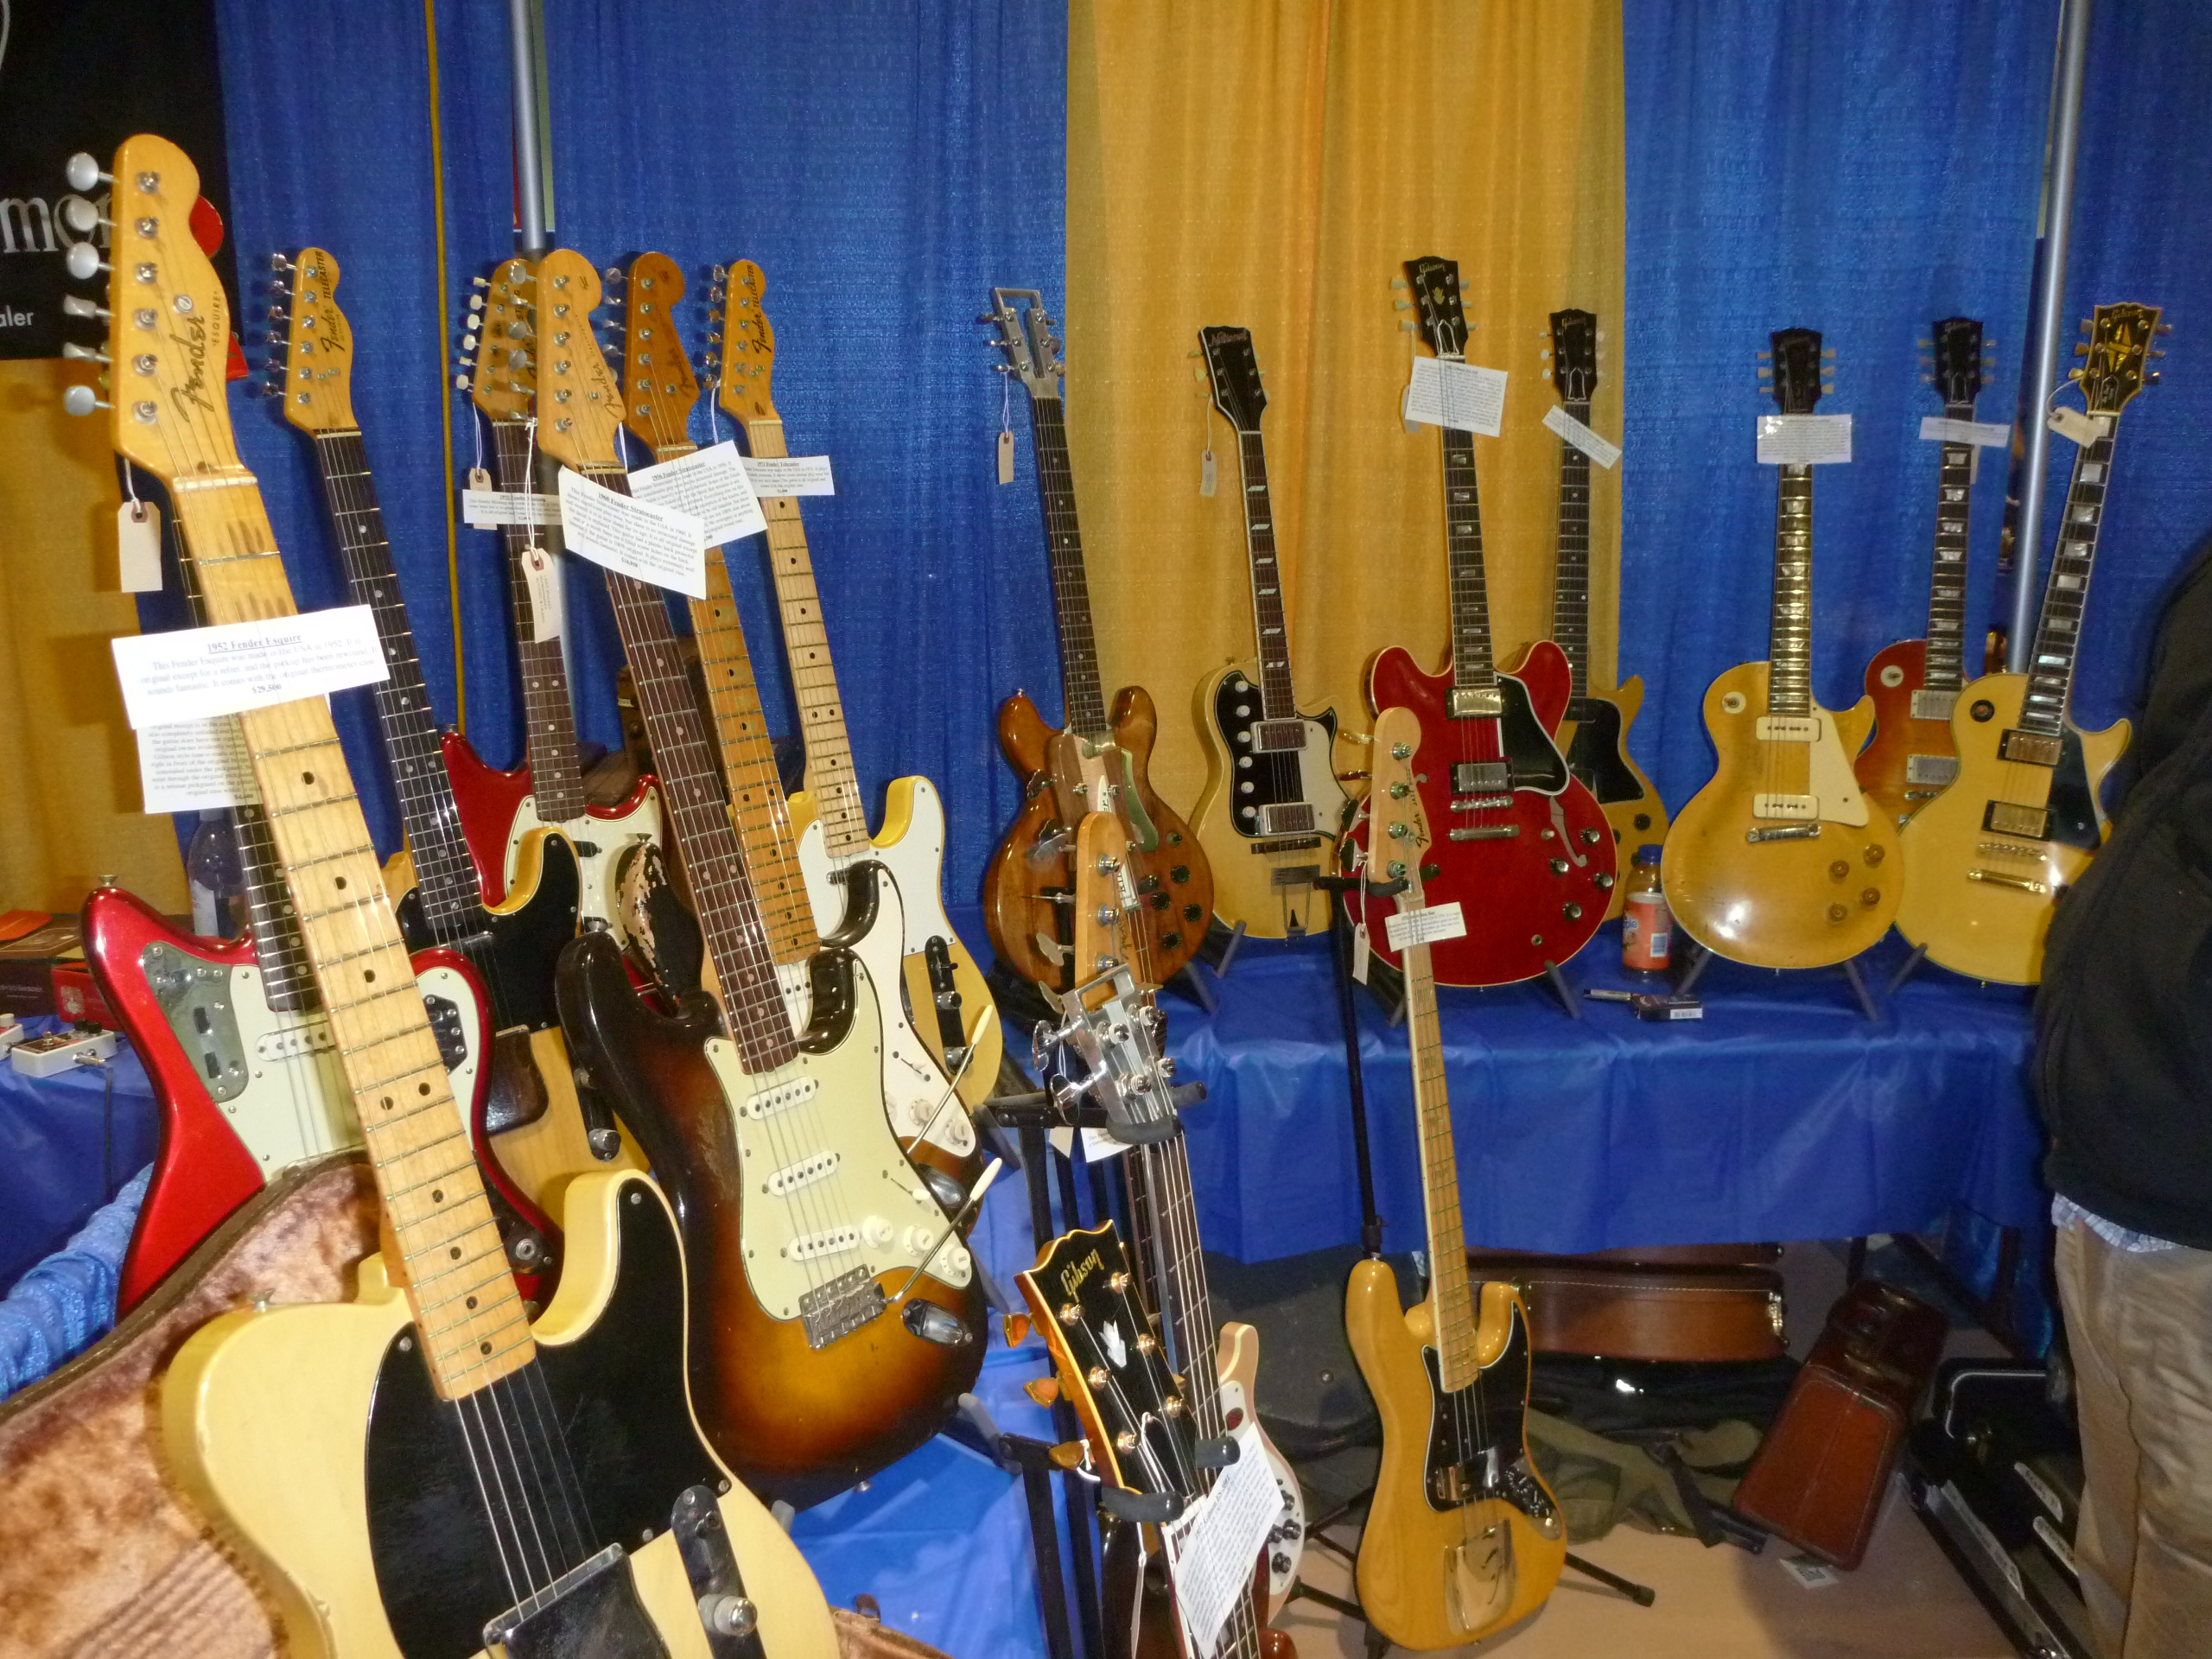 Look at this fine collection of vintage masterpieces in the Southside Guitars of Brooklyn, NY booth.